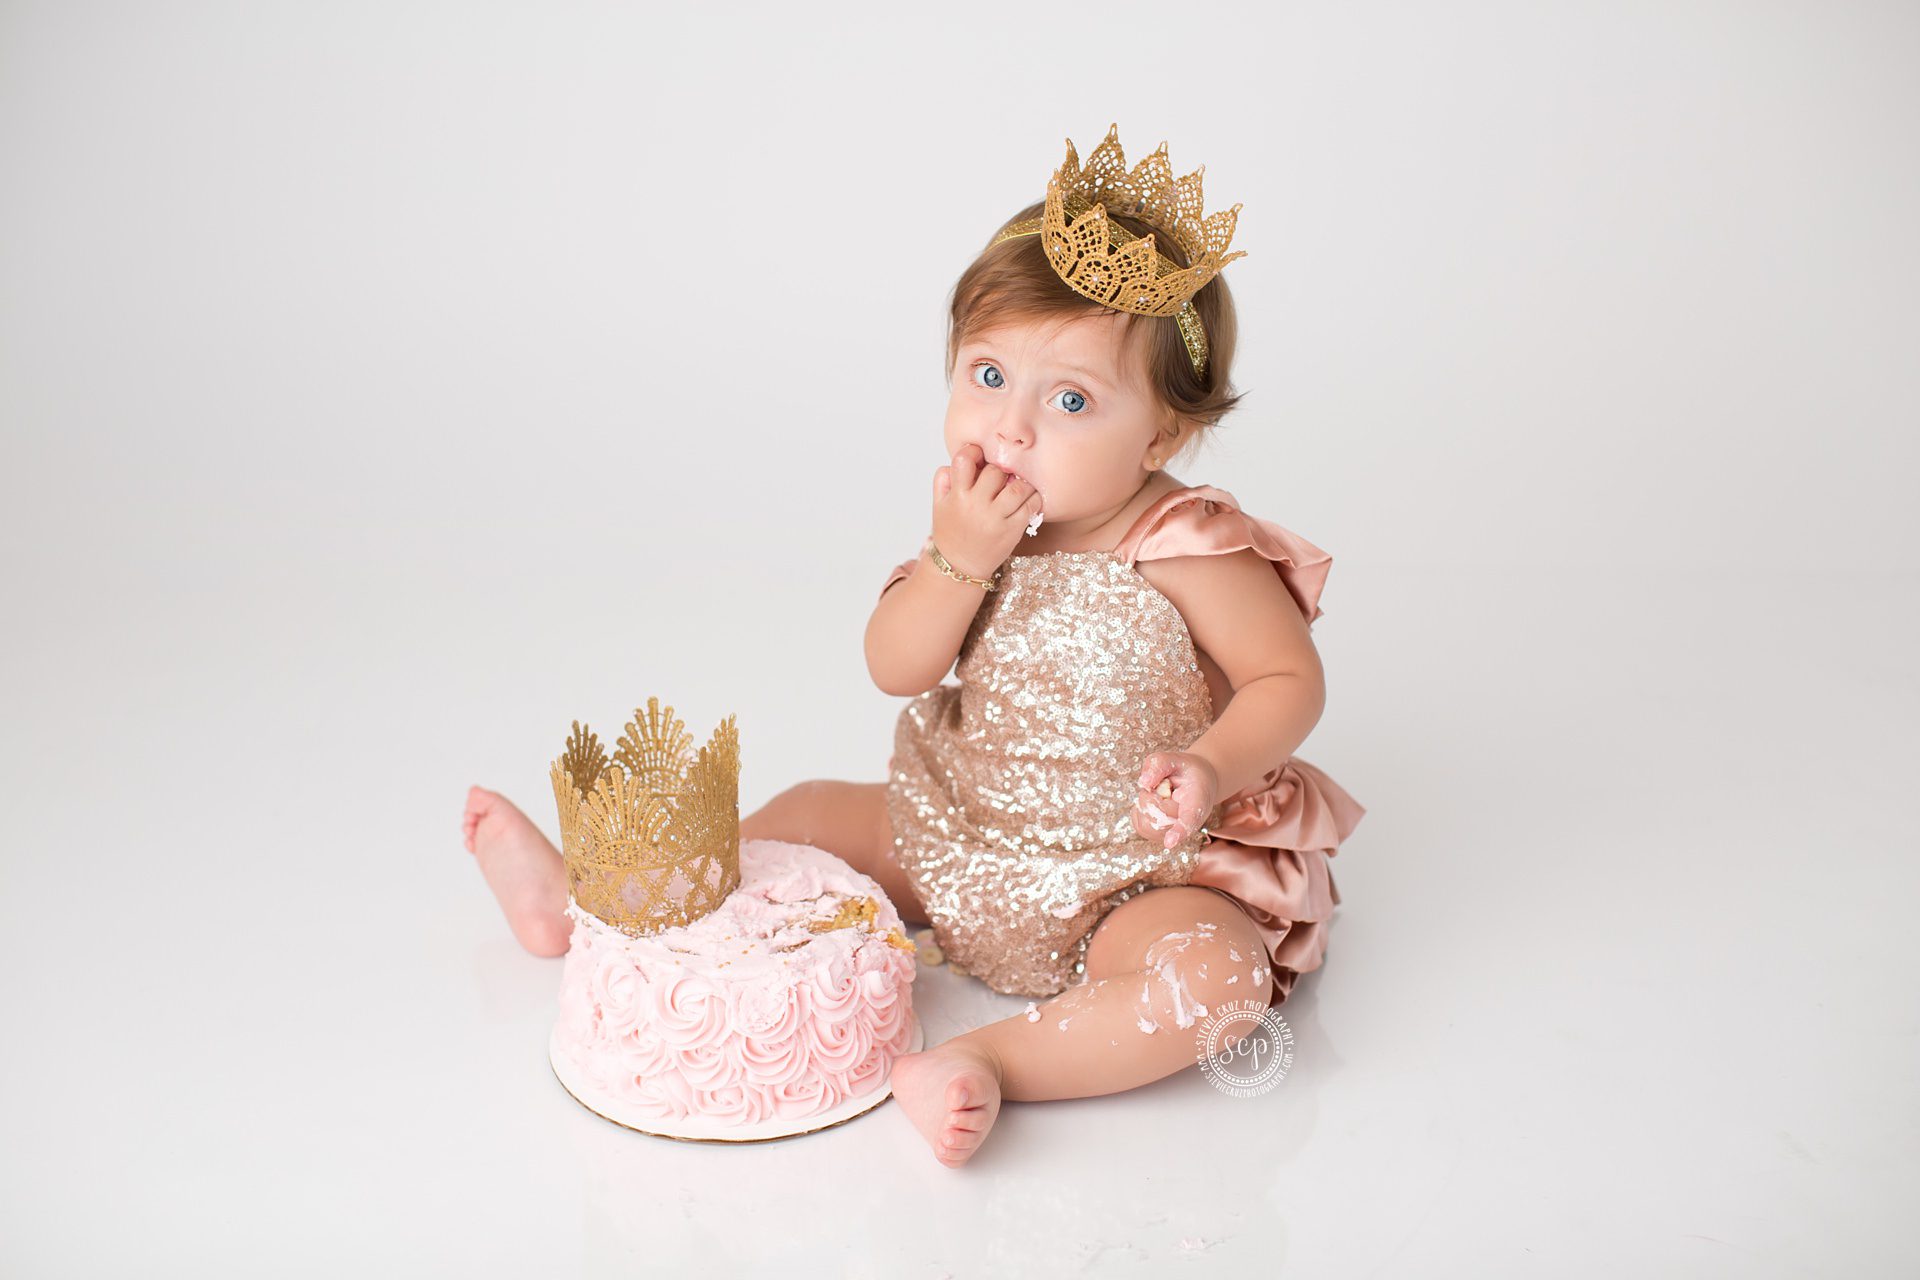 Cake Sessions pictures